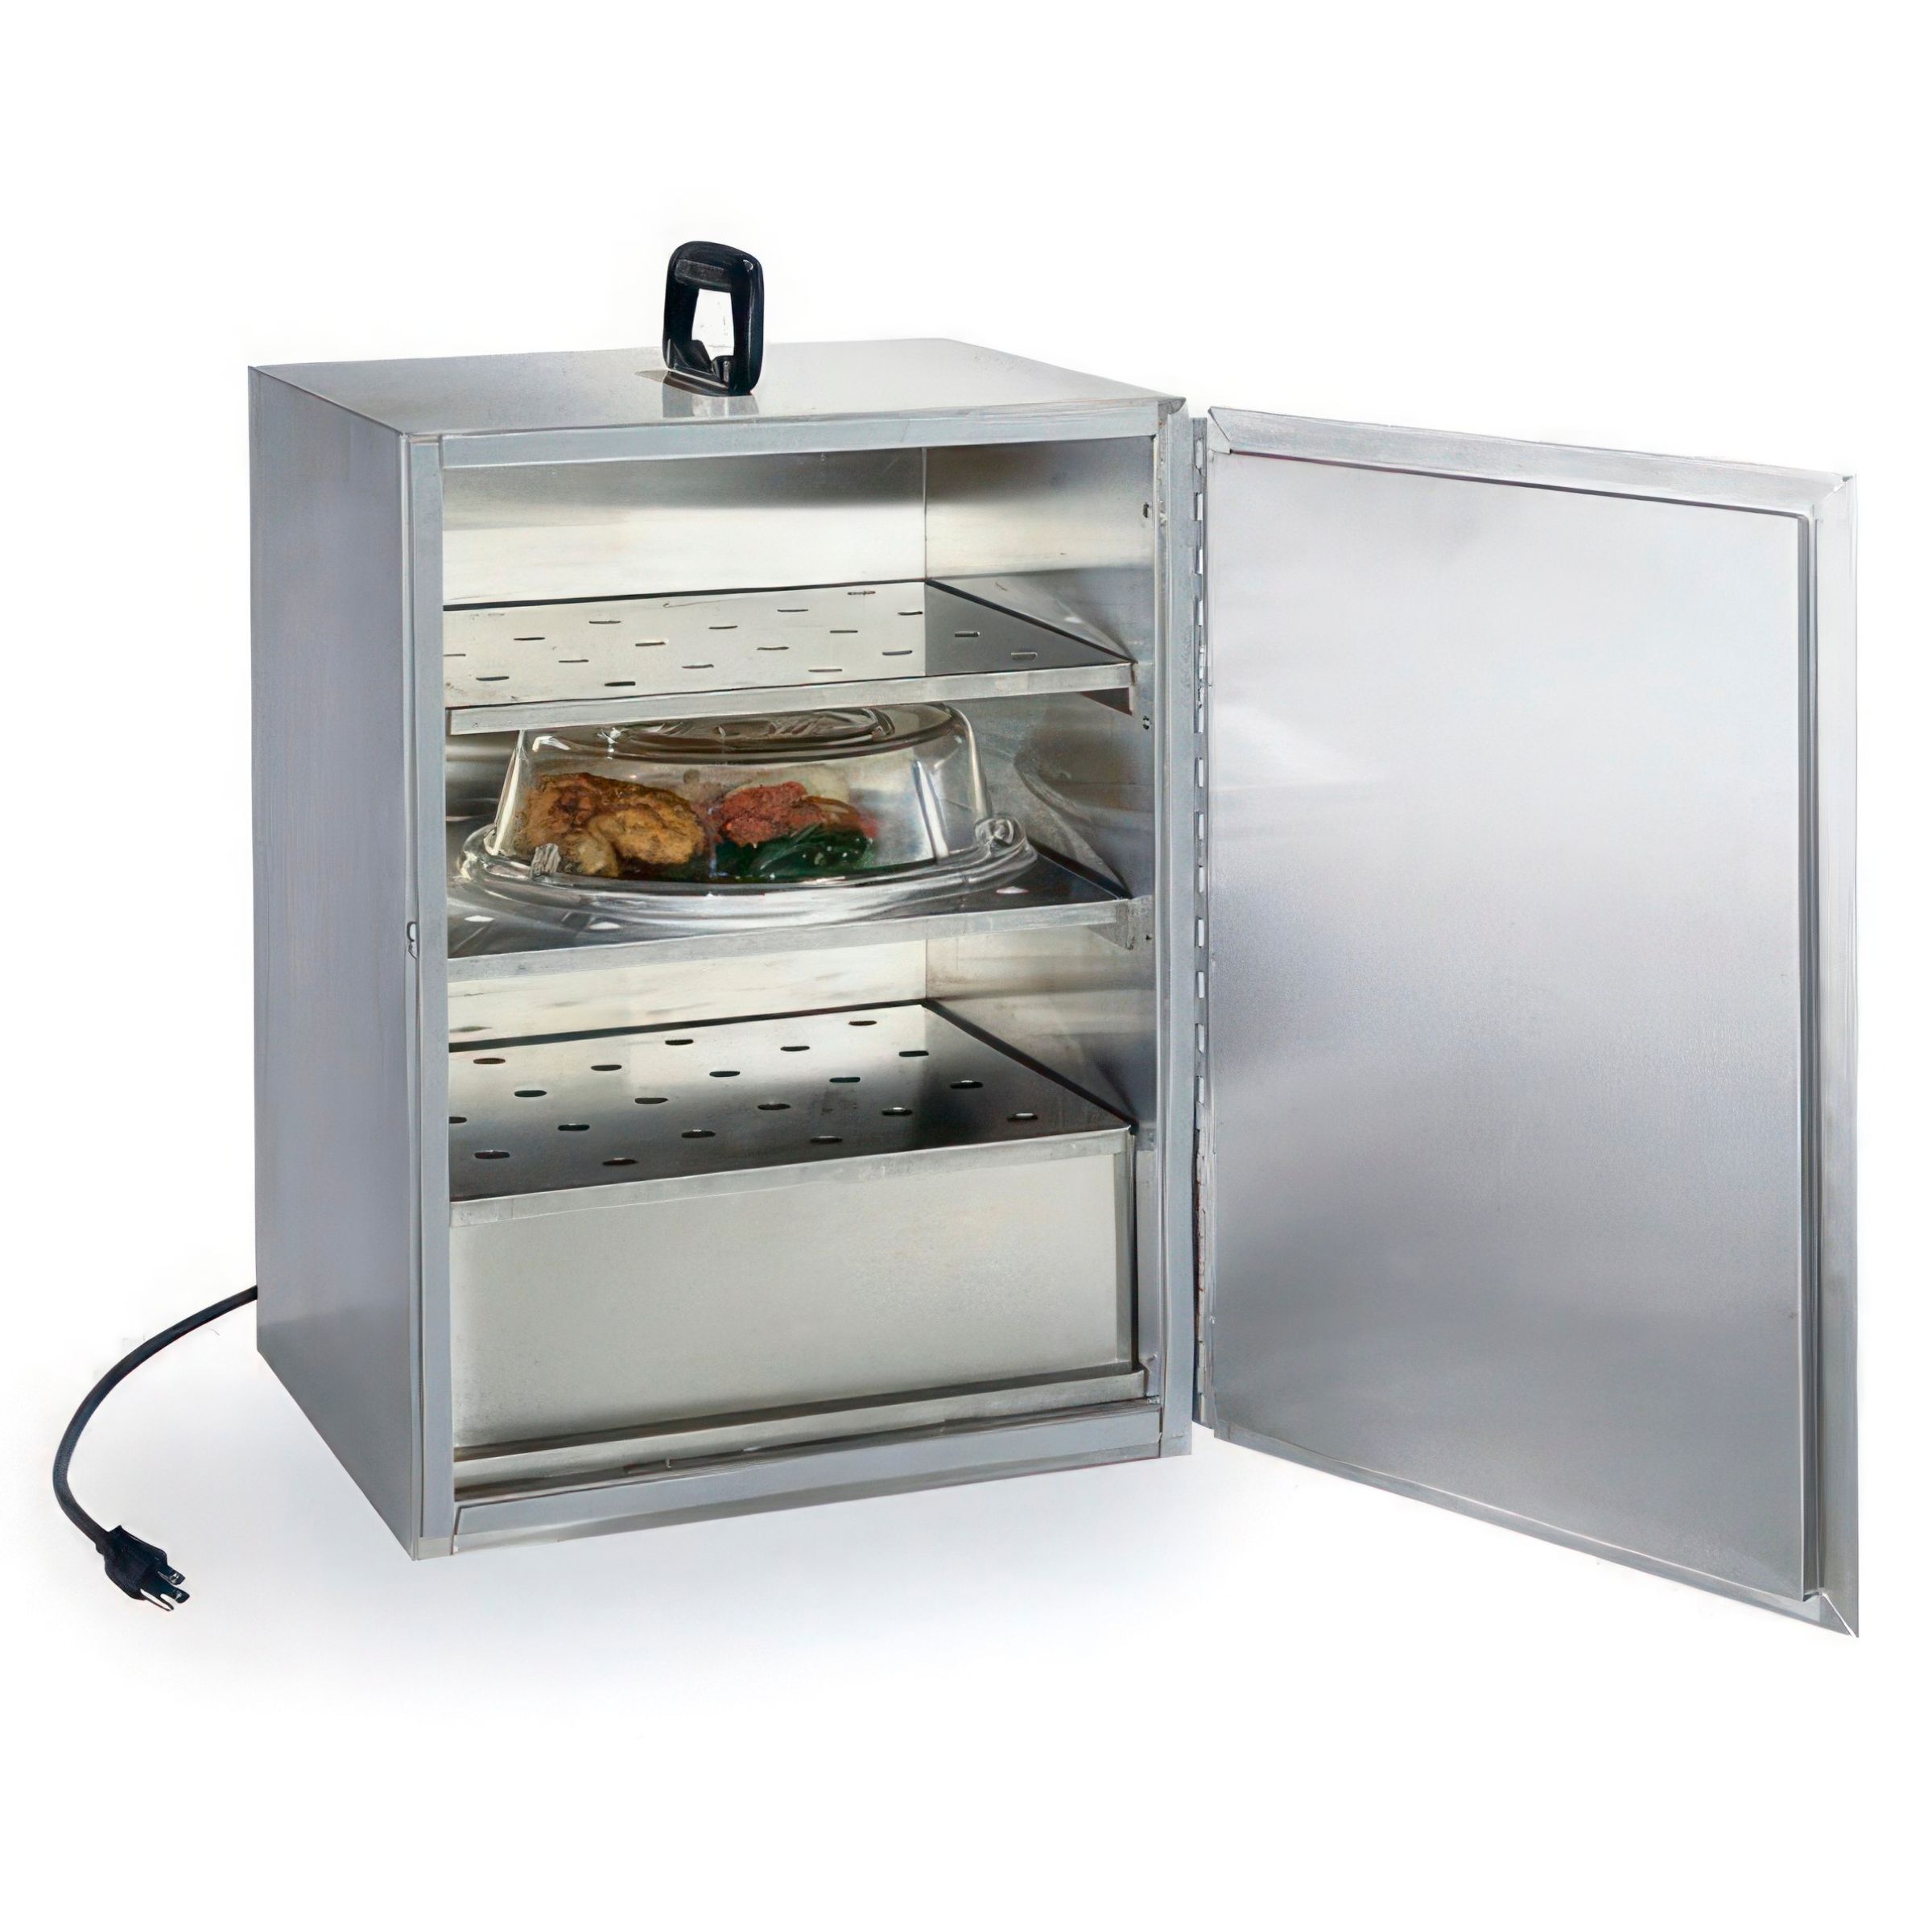 Lakeside 113 Food Carrier Box, Electrical Heat, Fully Insulated - Lakeside  Foodservice